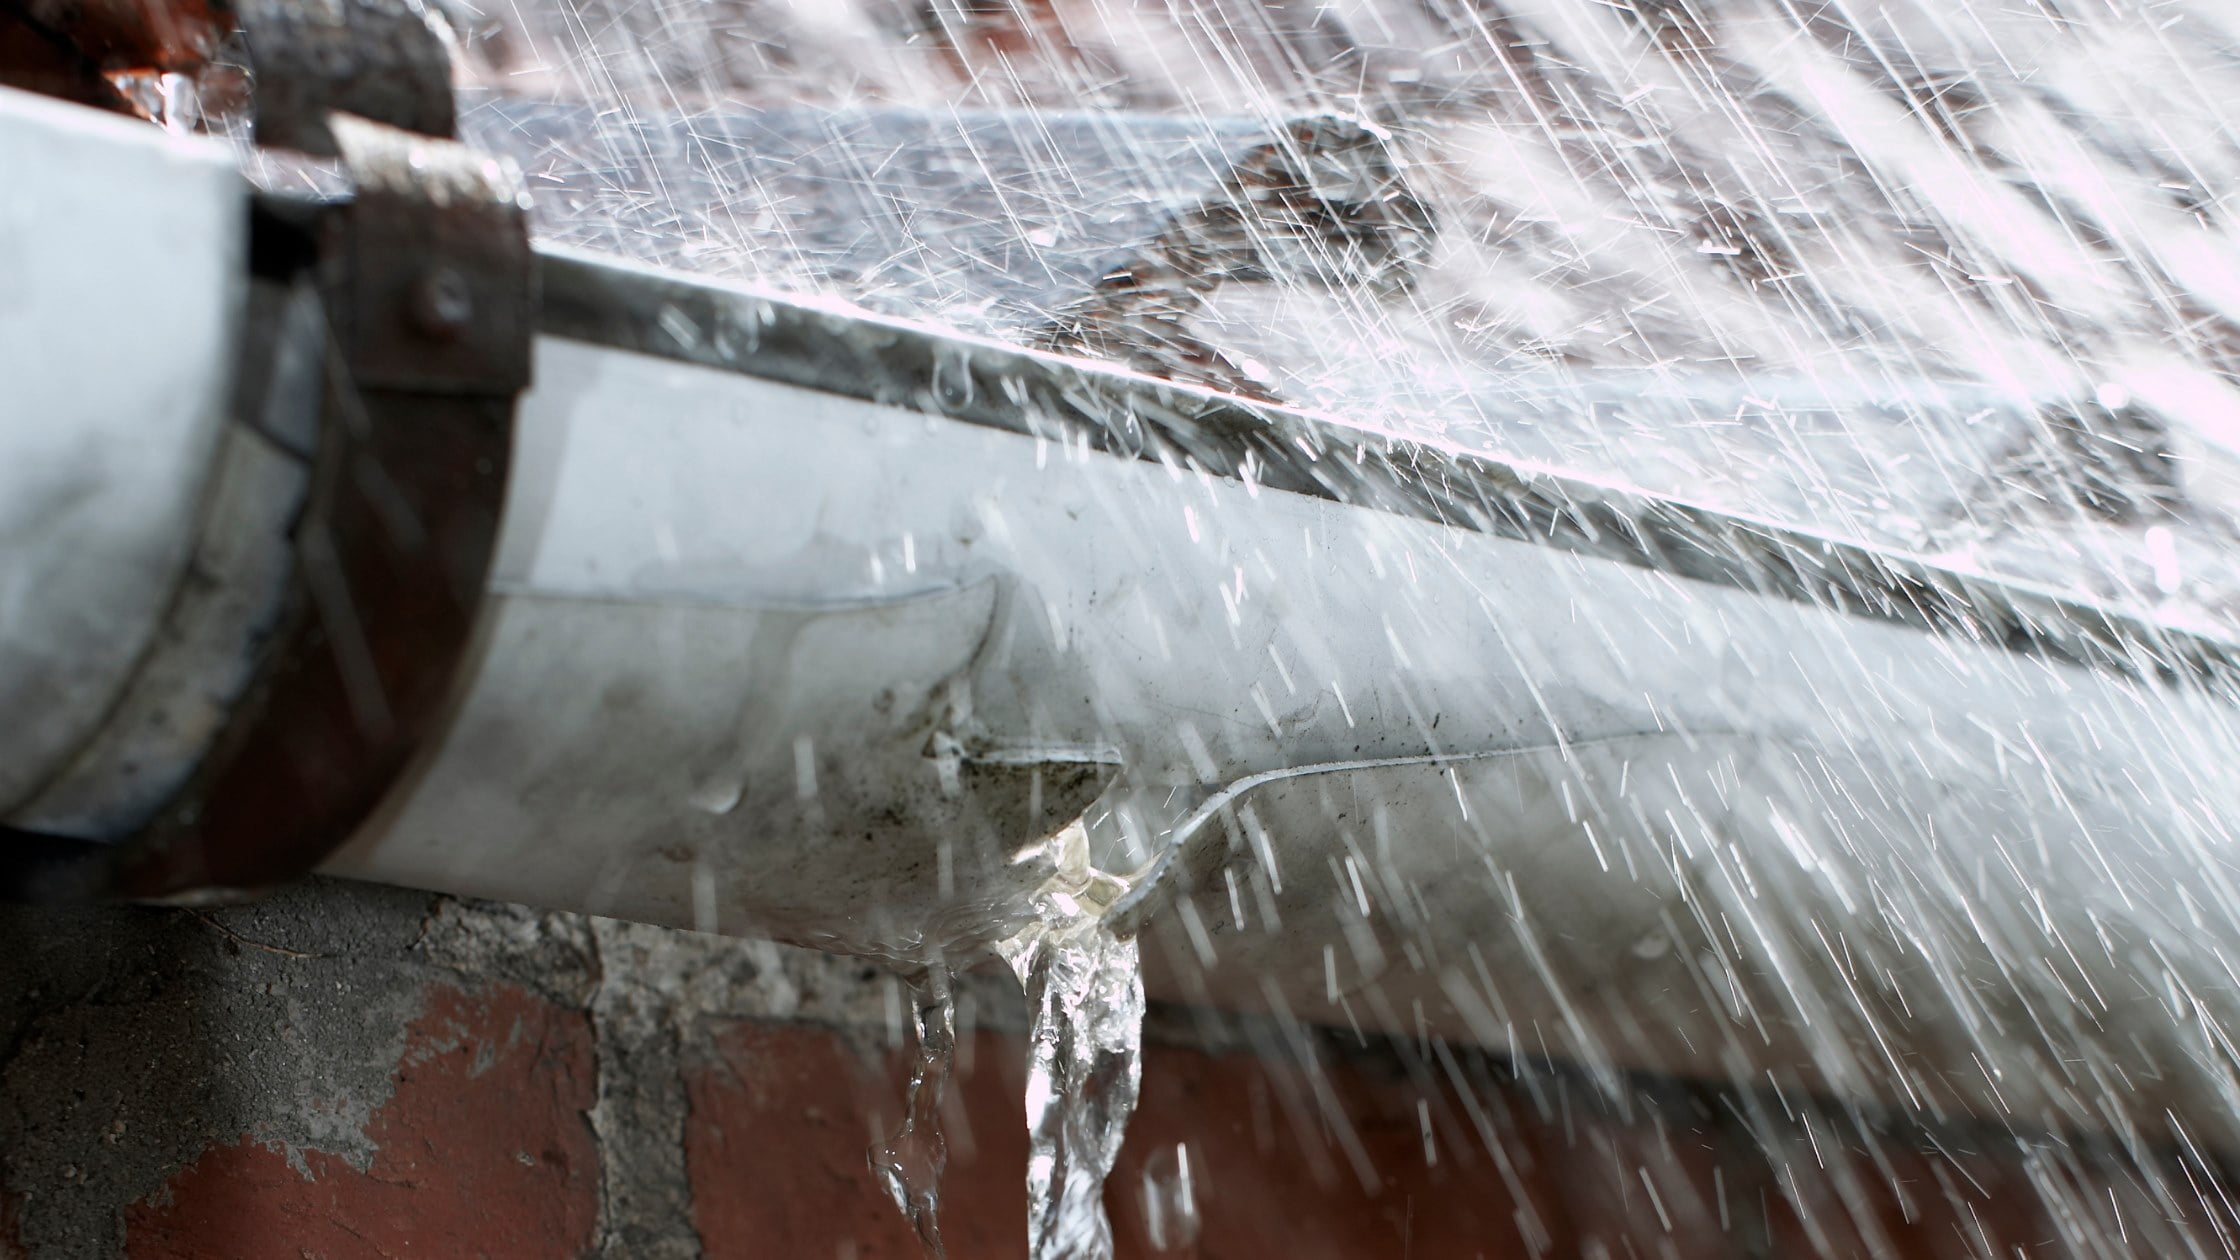 Water floods overboard when heavy storms hit blocked gutters.